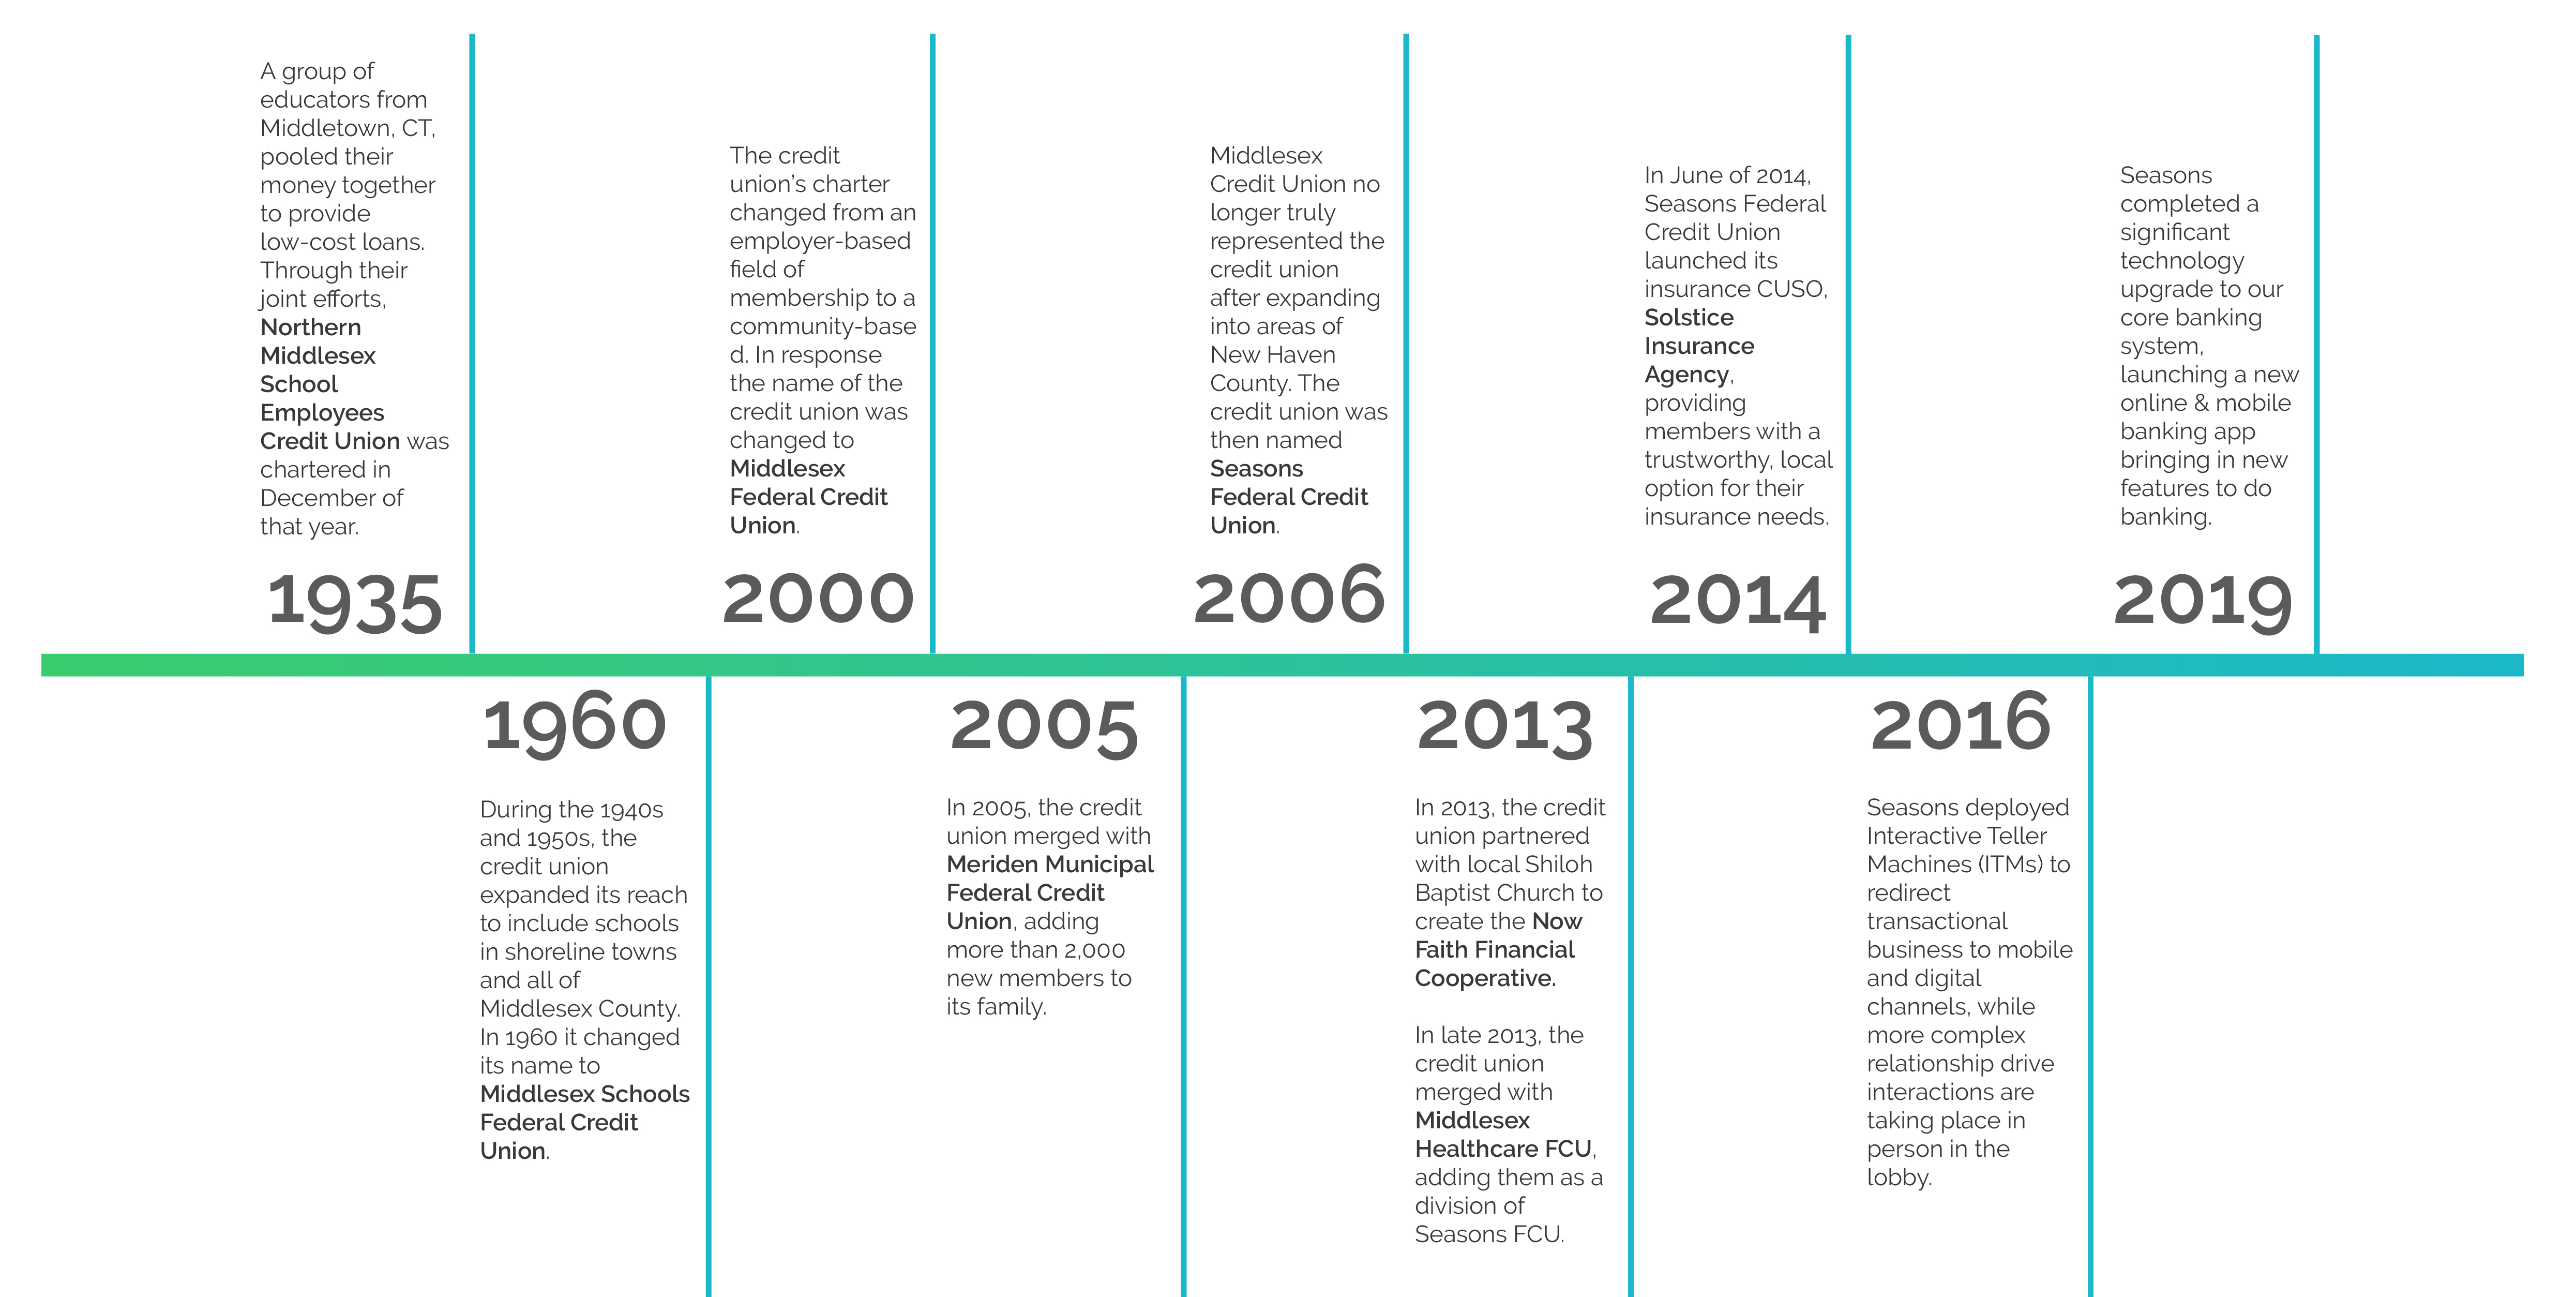 Timeline of accomplishments over the years